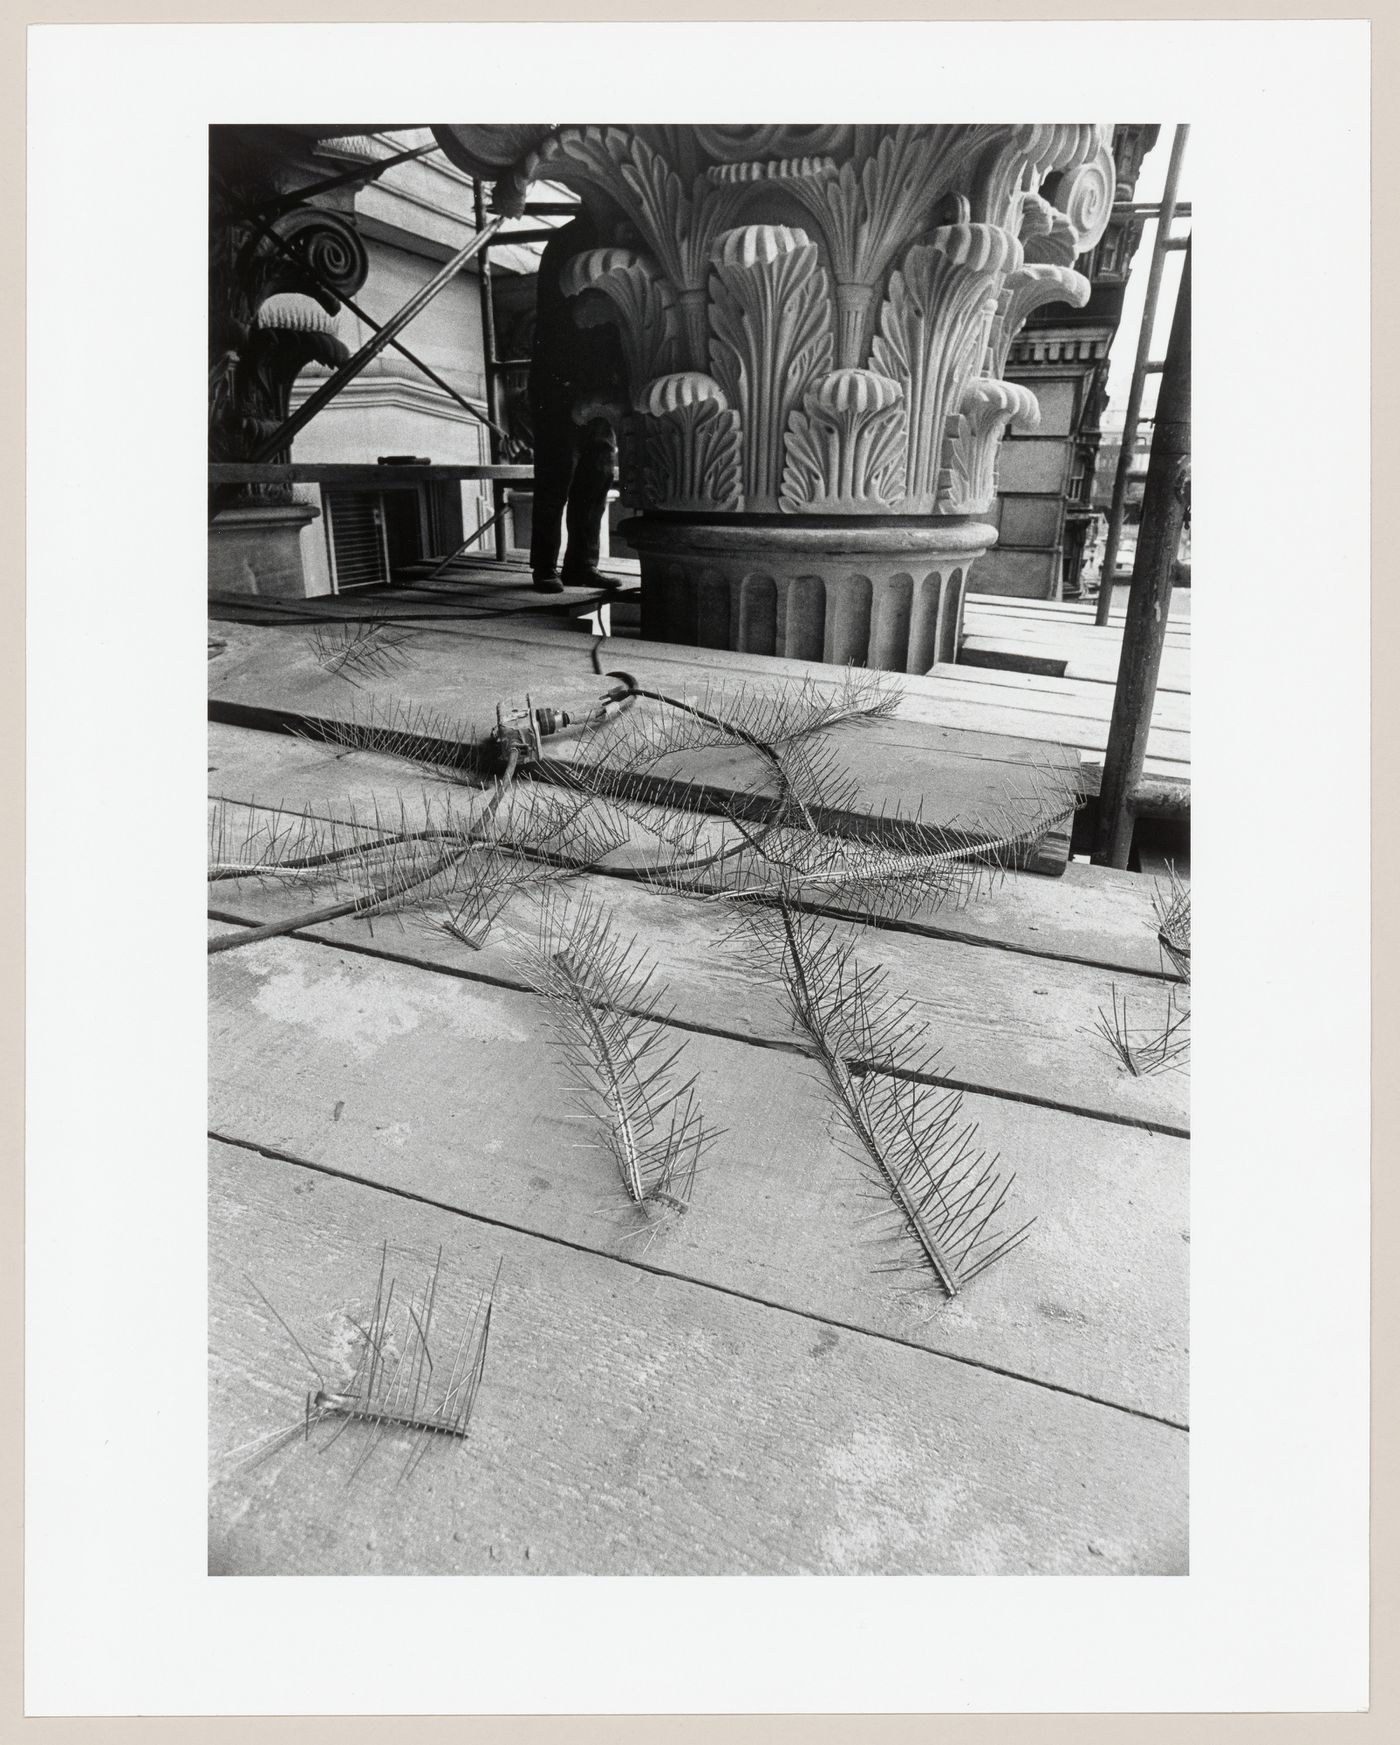 View of pigeon wire guards prior to installation on an aluminum capital during the restoration of the Corinthian capitals of the principal façade of the Head Office of the Bank of Montréal, 119 rue Saint-Jacques, Montréal, Québec